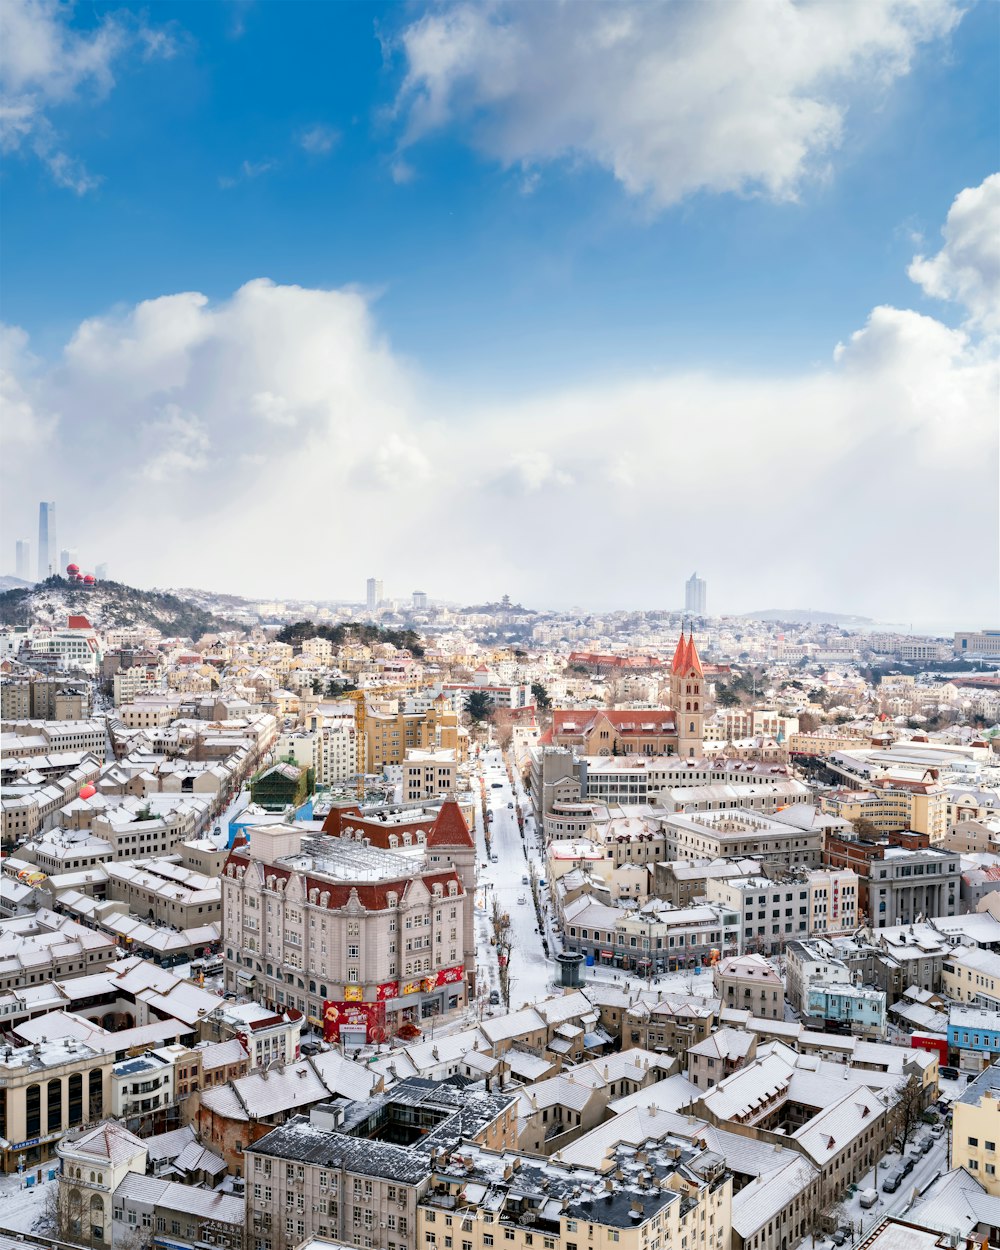 a view of a city with snow on the ground